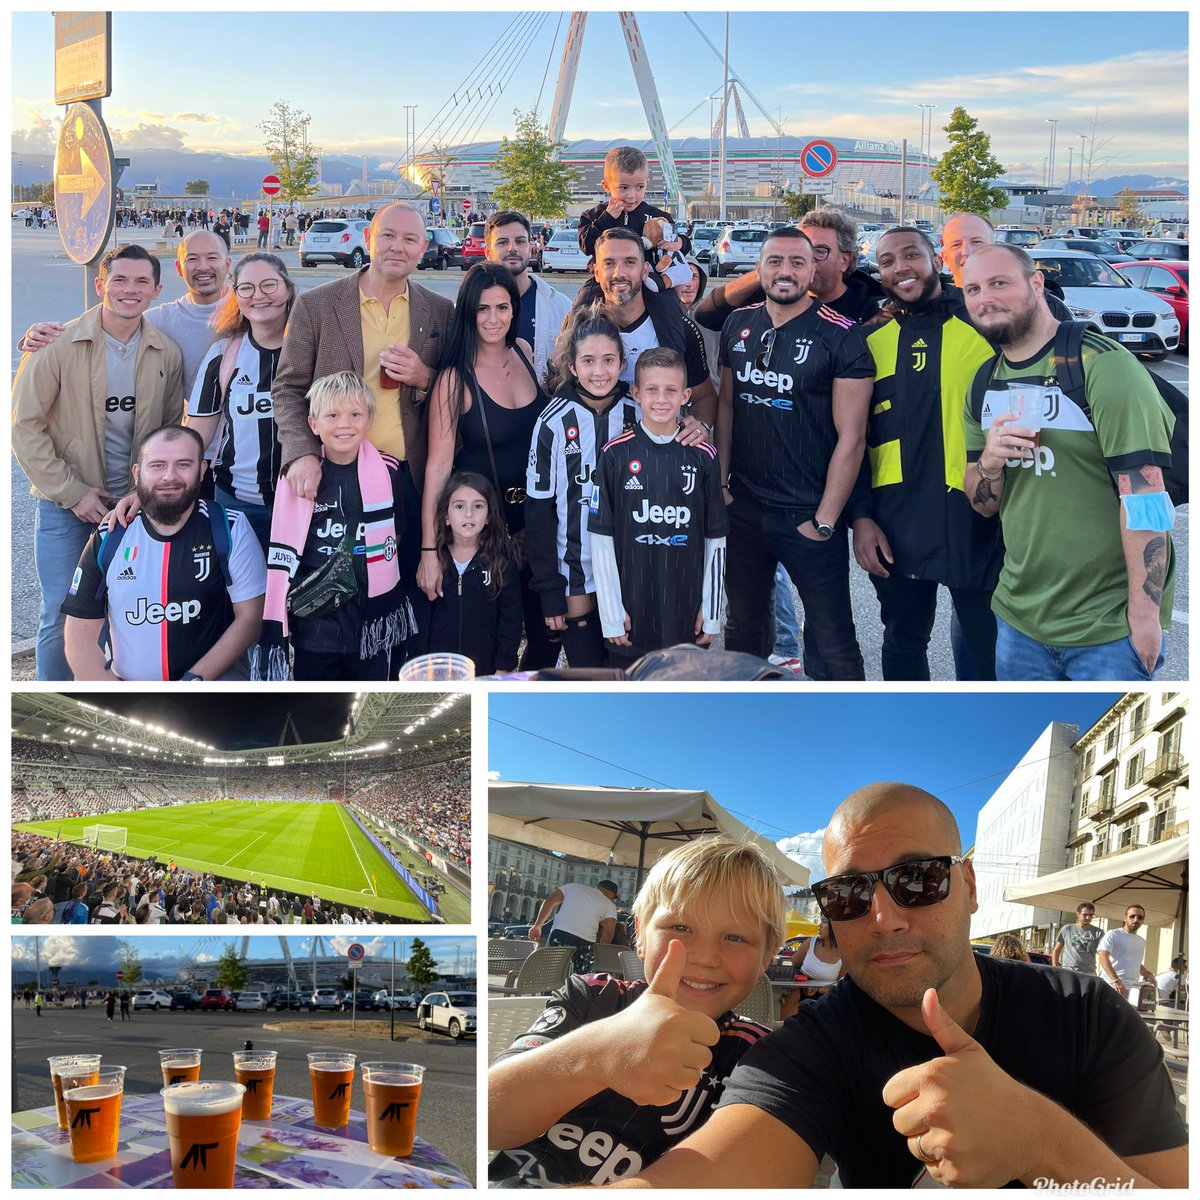 We always win! 🖤 Free drinks for everyone and new friends from 🇷🇴🇦🇺🇬🇧🇱🇾🇮🇹🇺🇸🇩🇰🇩🇪🇱🇧🇿🇦 🙌🏻 see you for Juve-Samp and Juve-Chelsea! #YourFamilyInTurin